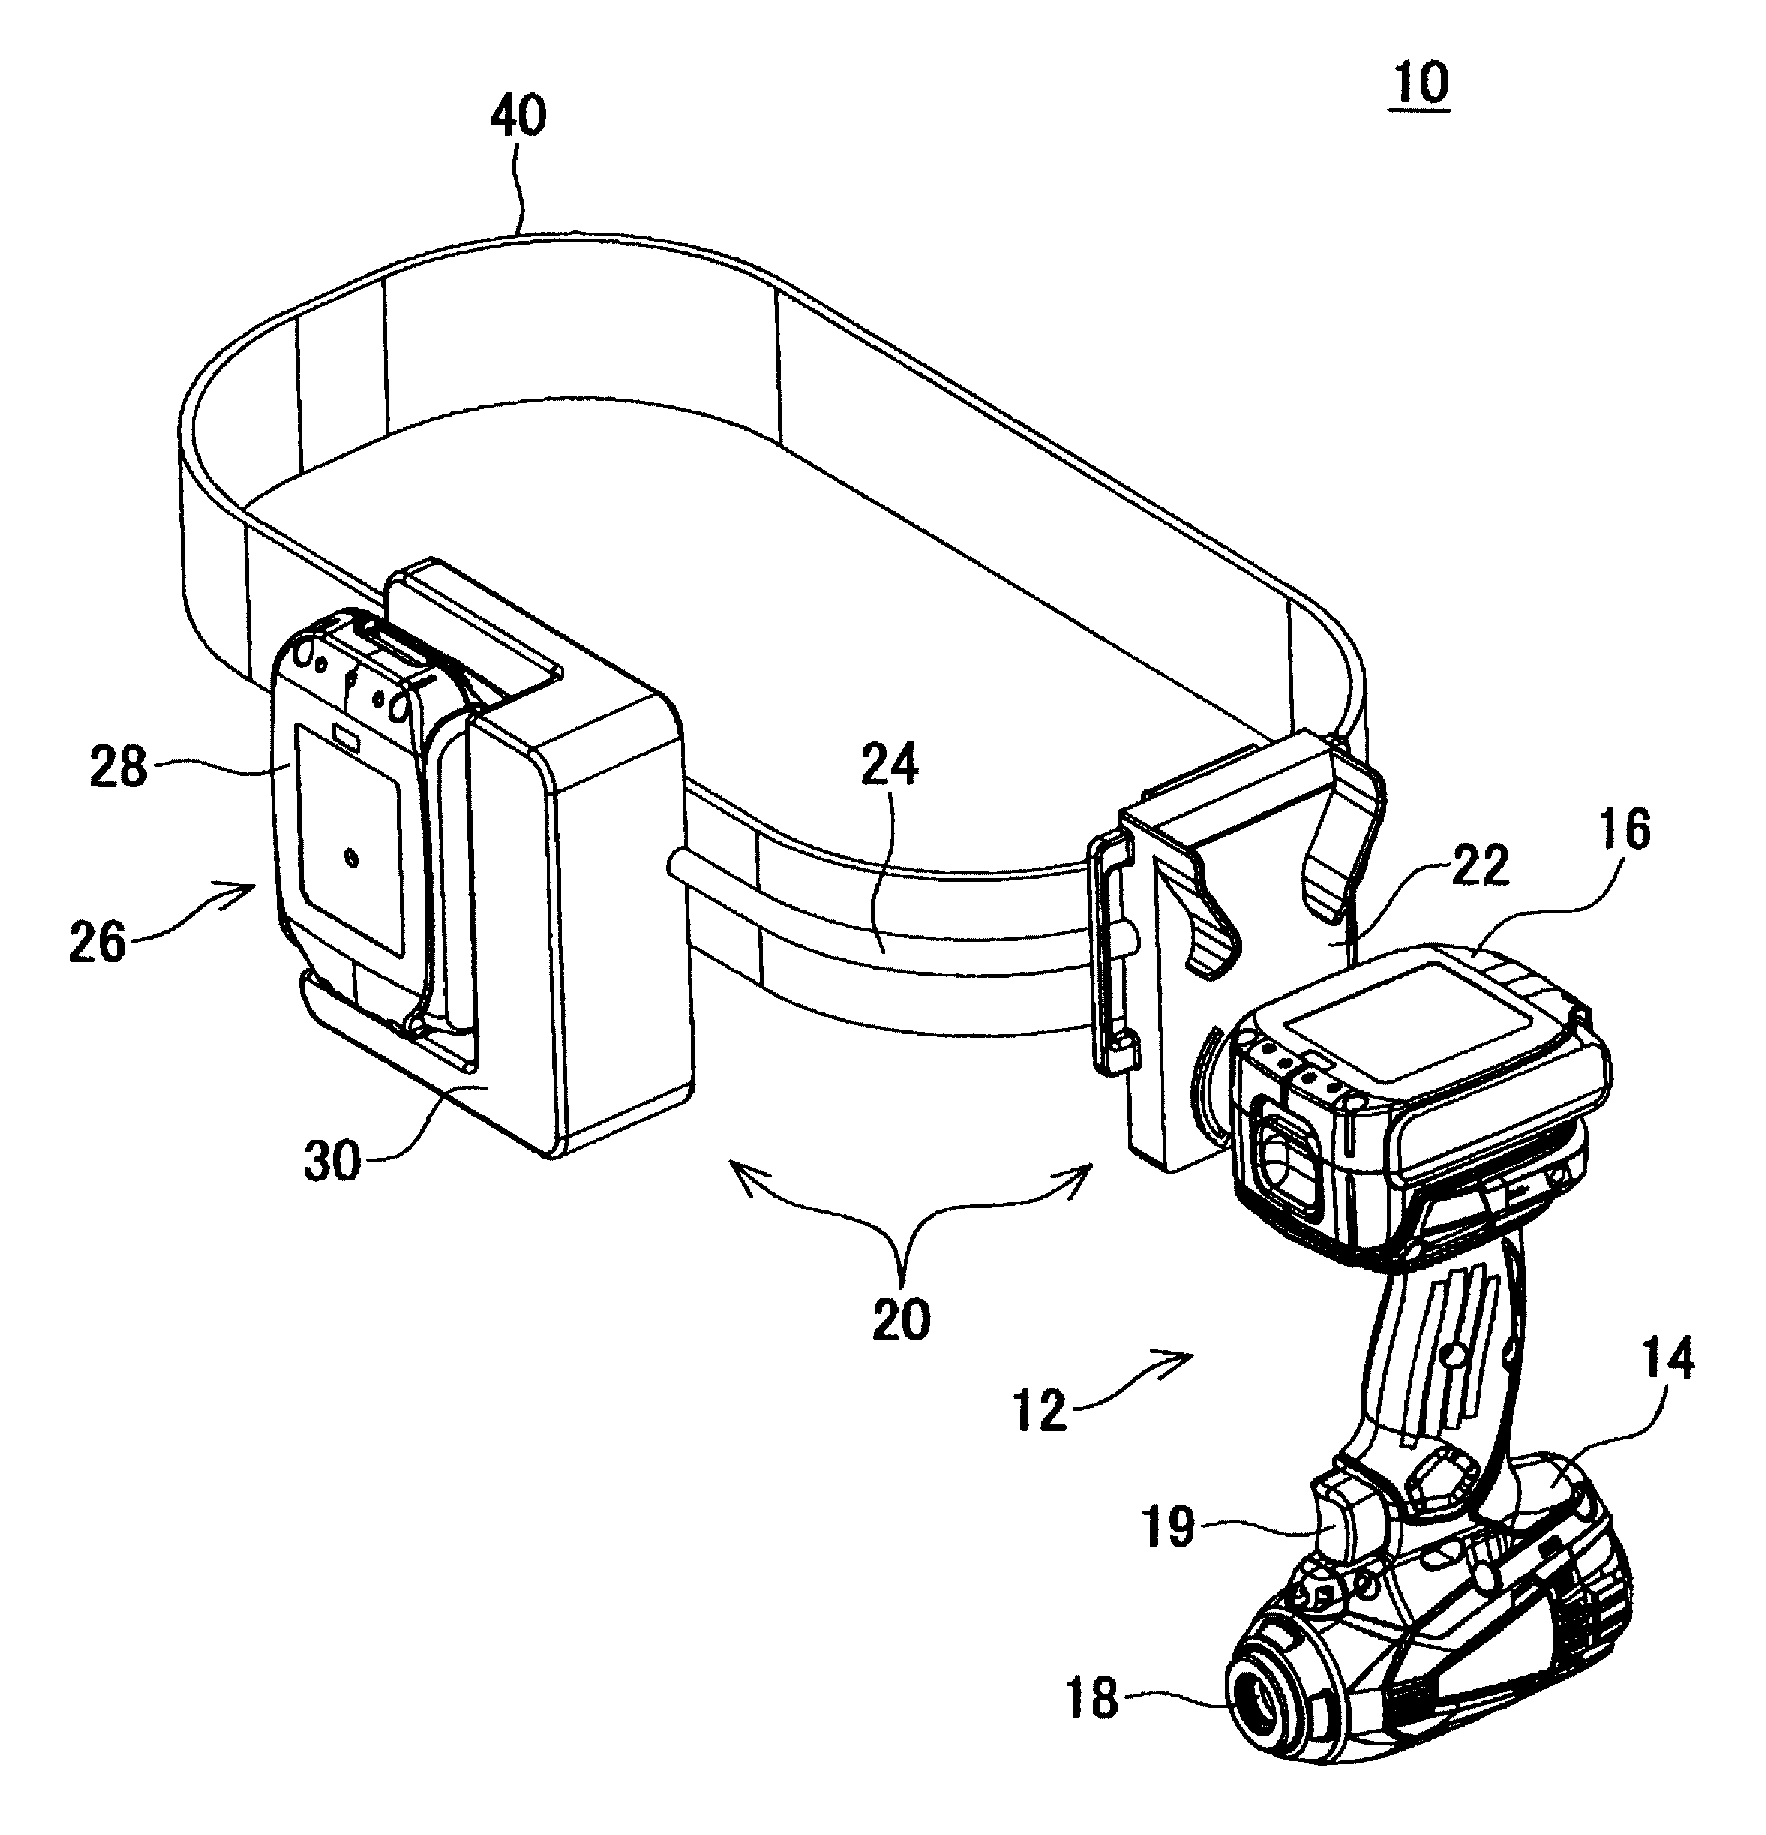 Charger for hand-held power tool, power tool system and method of charging a power tool battery